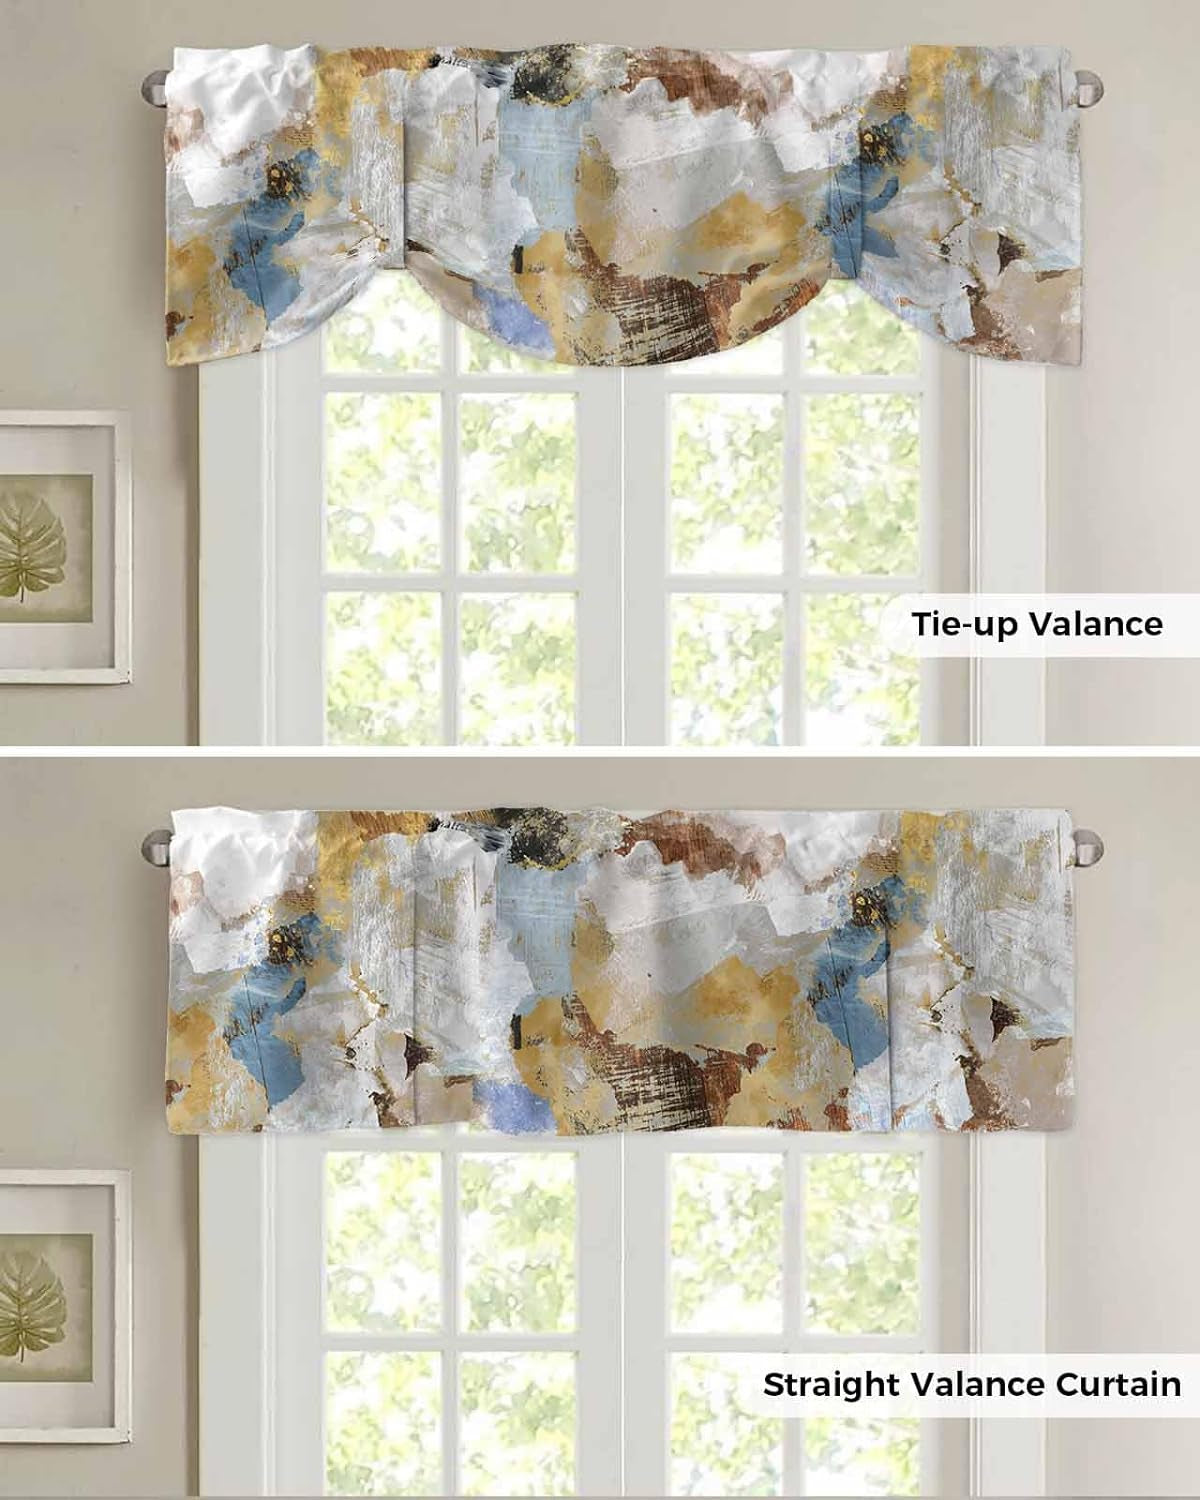 Brown Blue Abstract Tie up Valance Curtains for Windows, Kitchen Curtains Window Treatments, Modern Oil Painted Art Short Window Shades Valances for Bedroom Bathroom Cafe 60"X18"